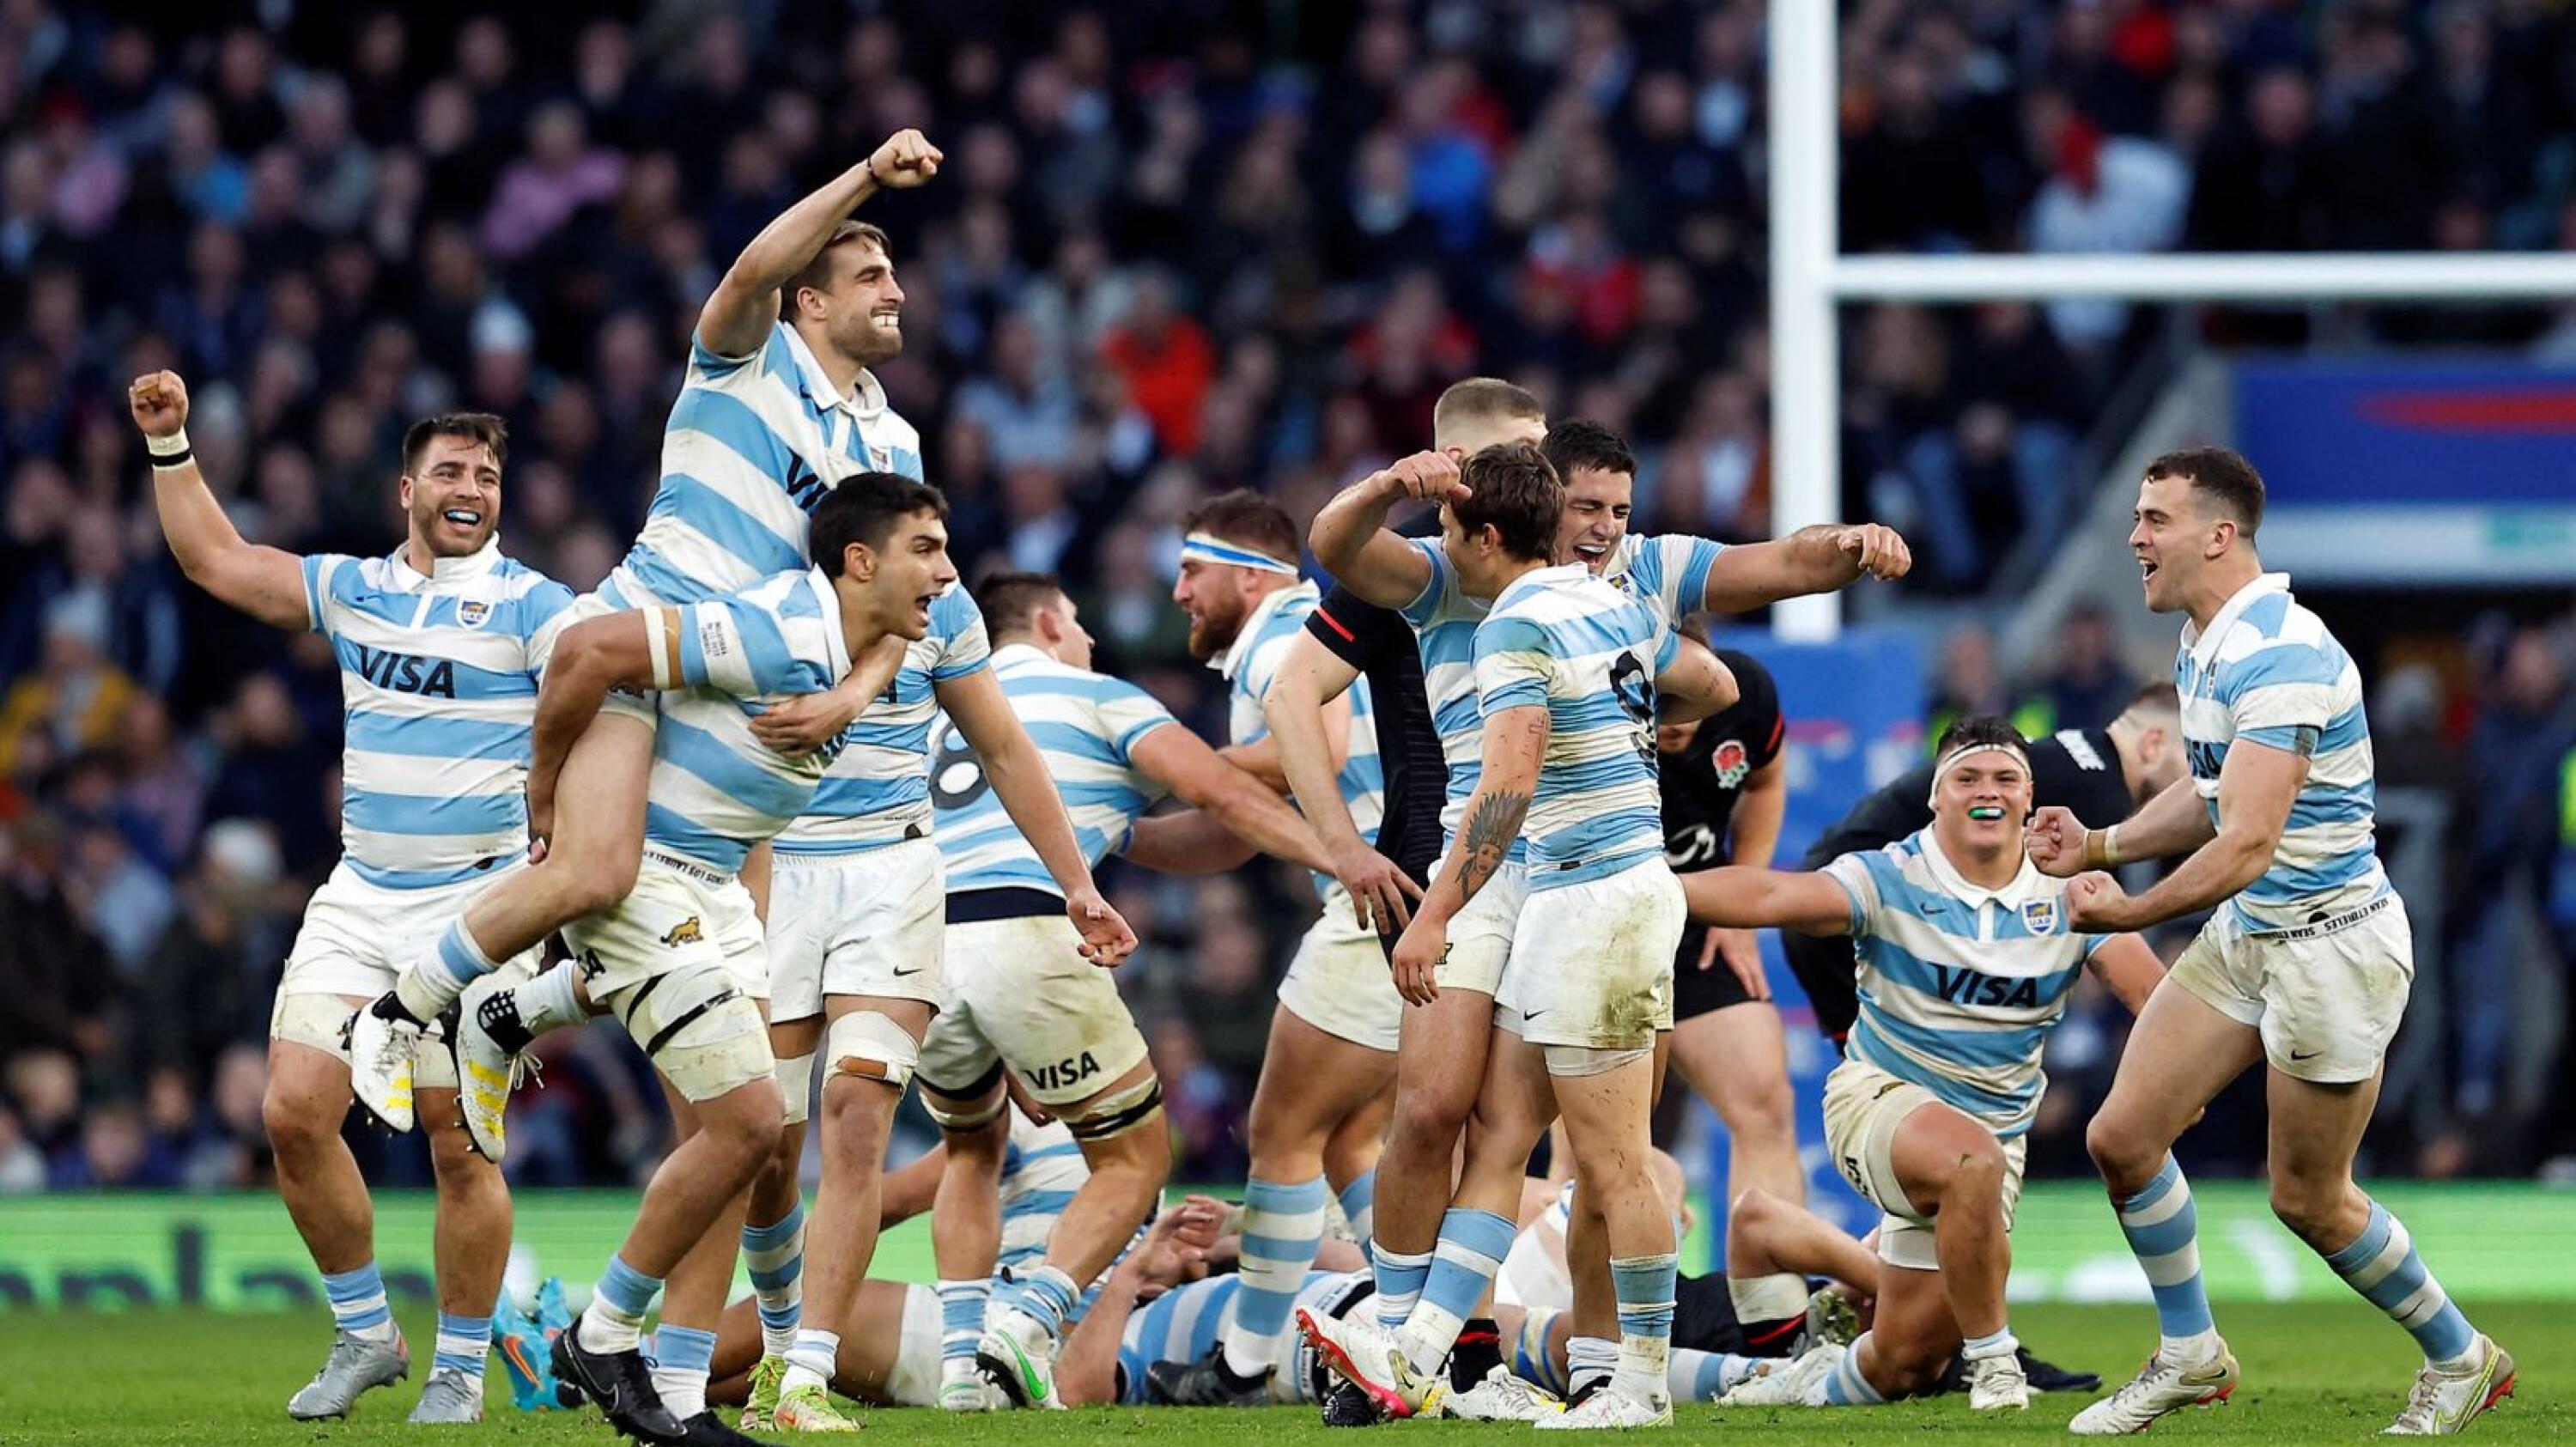 Argentina players celebrate after their Test match win against England at Twickenham Stadium in London on Sunday